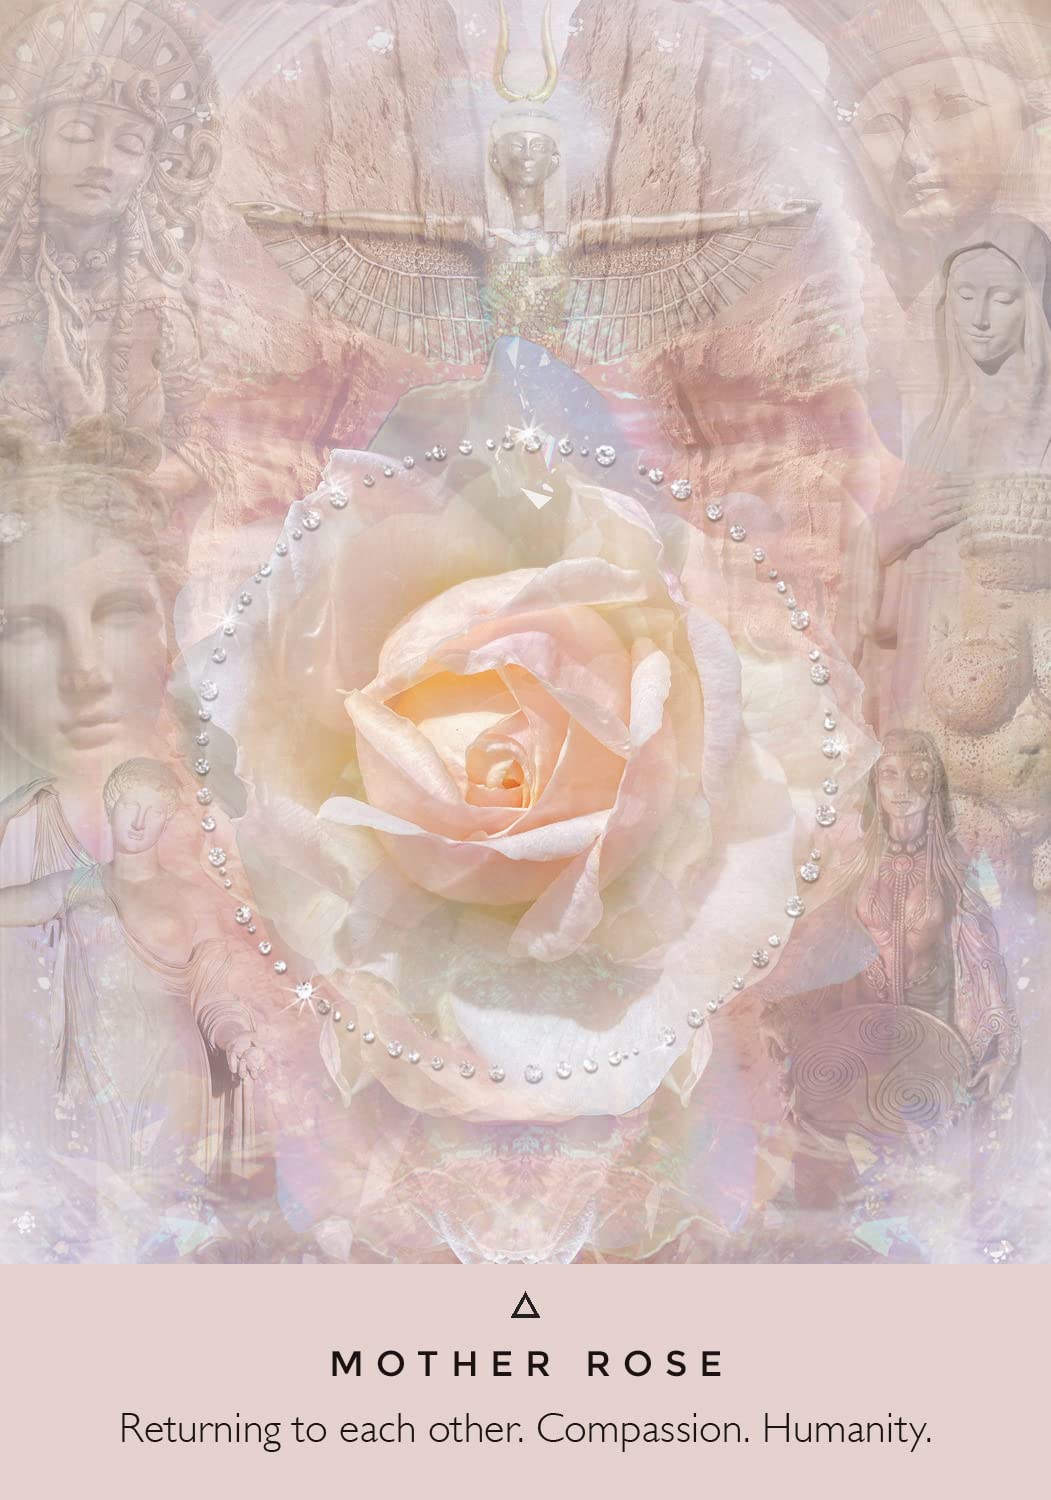 The Rose Oracle Cards